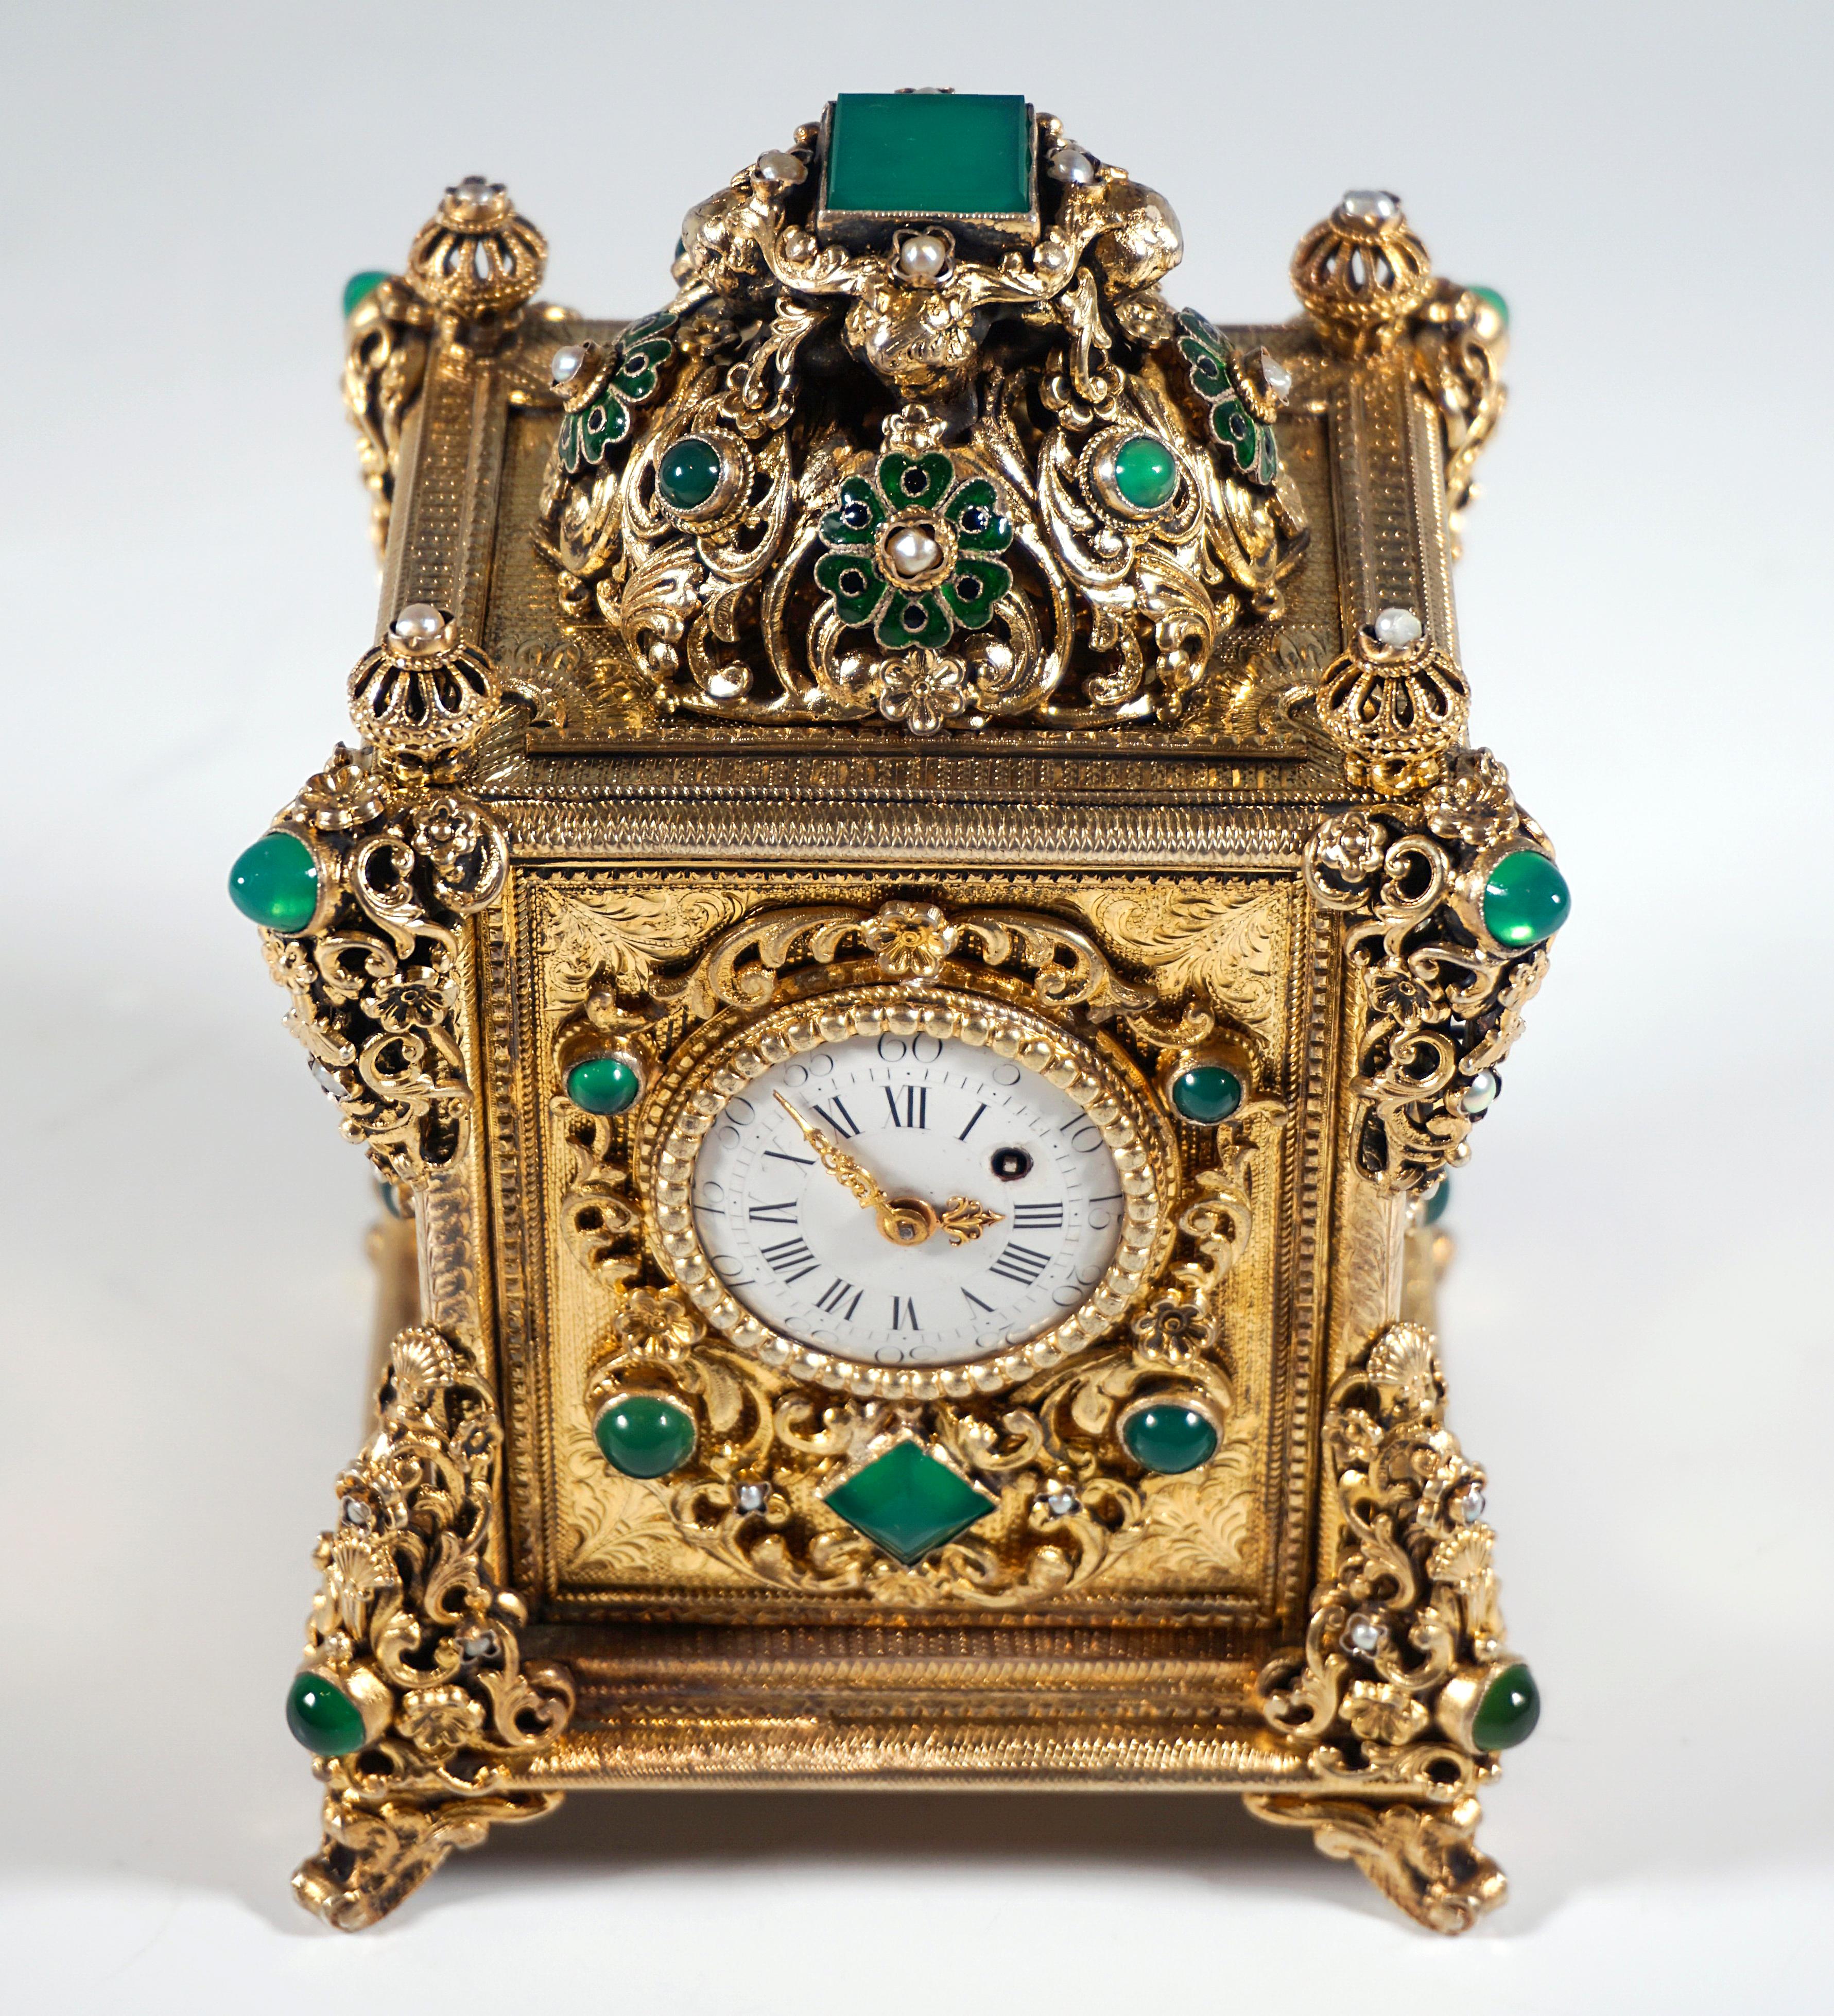 Hand-Crafted Viennese Gilt Silver Splendid Table Clock With Green Chalcedony Trimming, C 1880